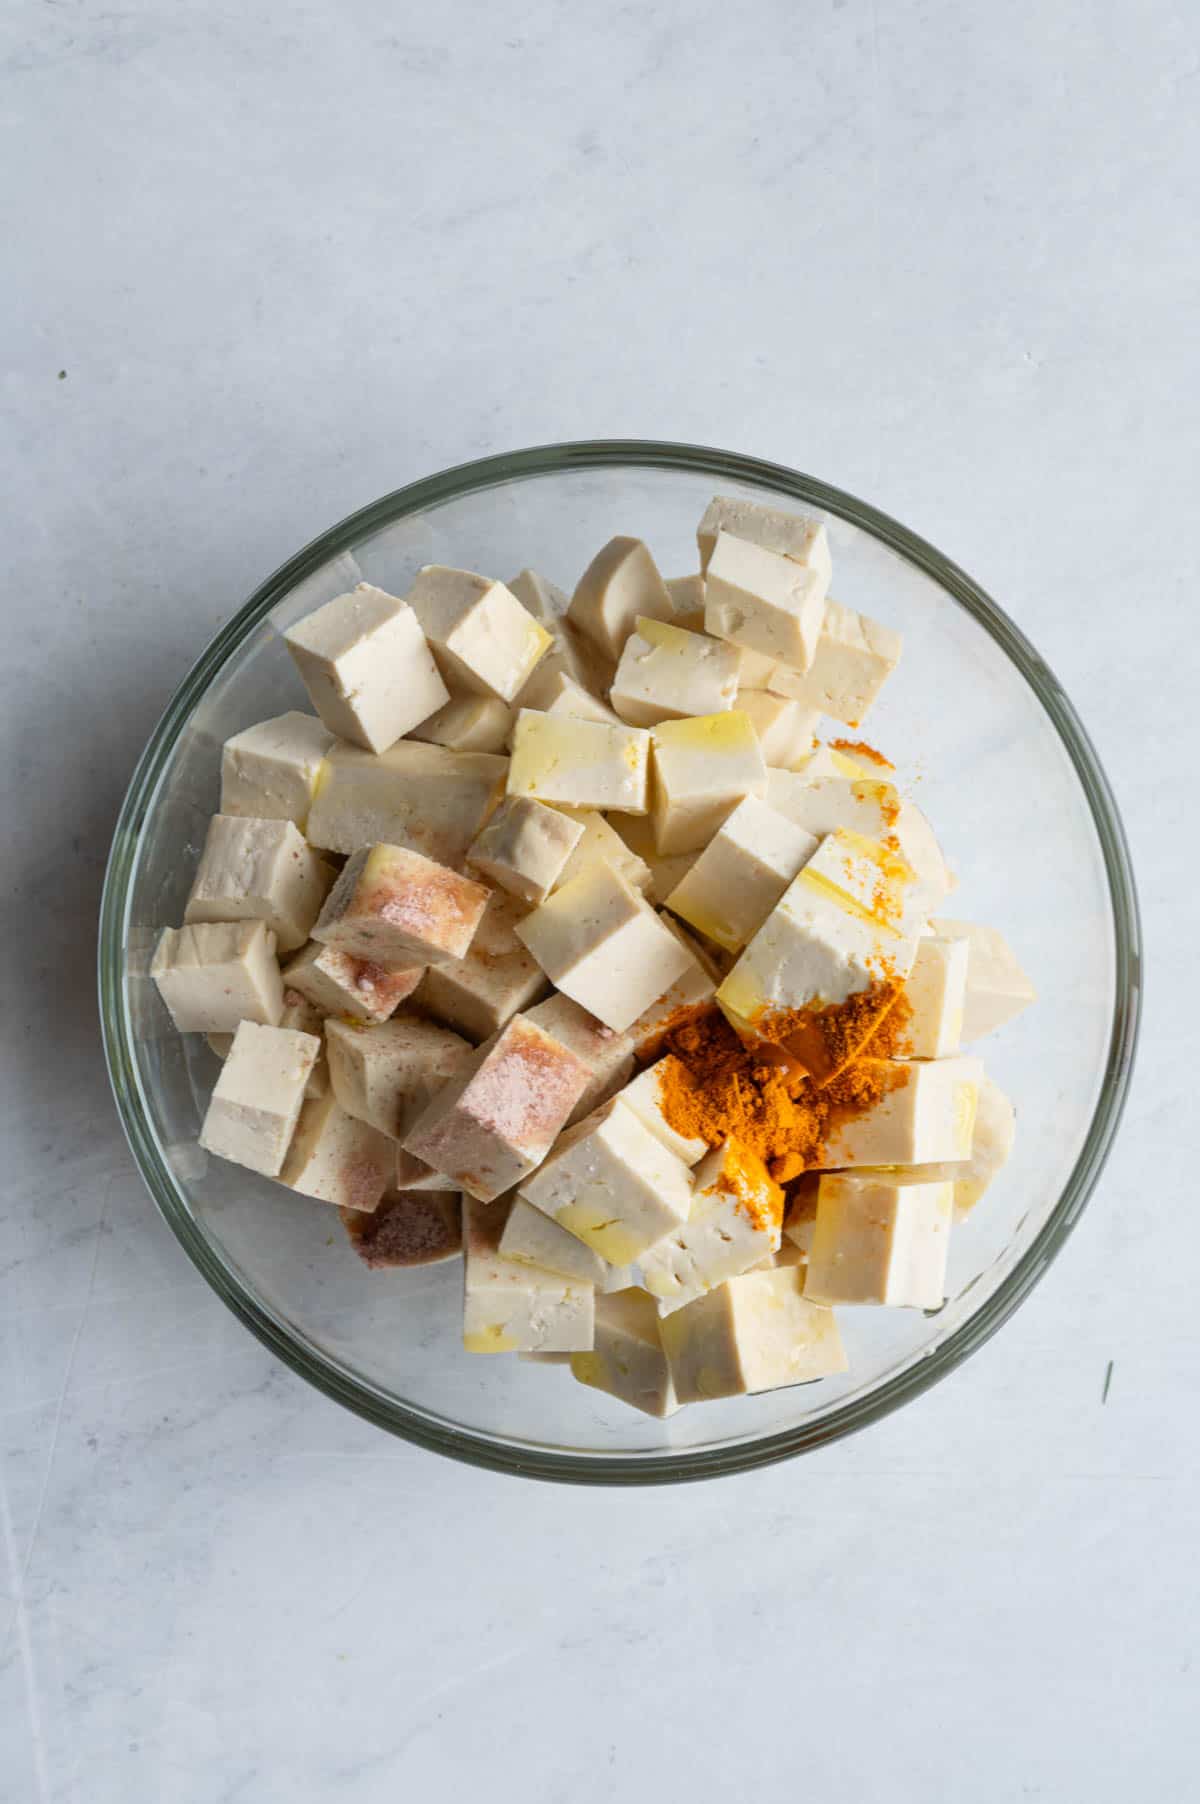 Cubed tofu in a glass bowl with turmeric, kala namak, and olive oil.